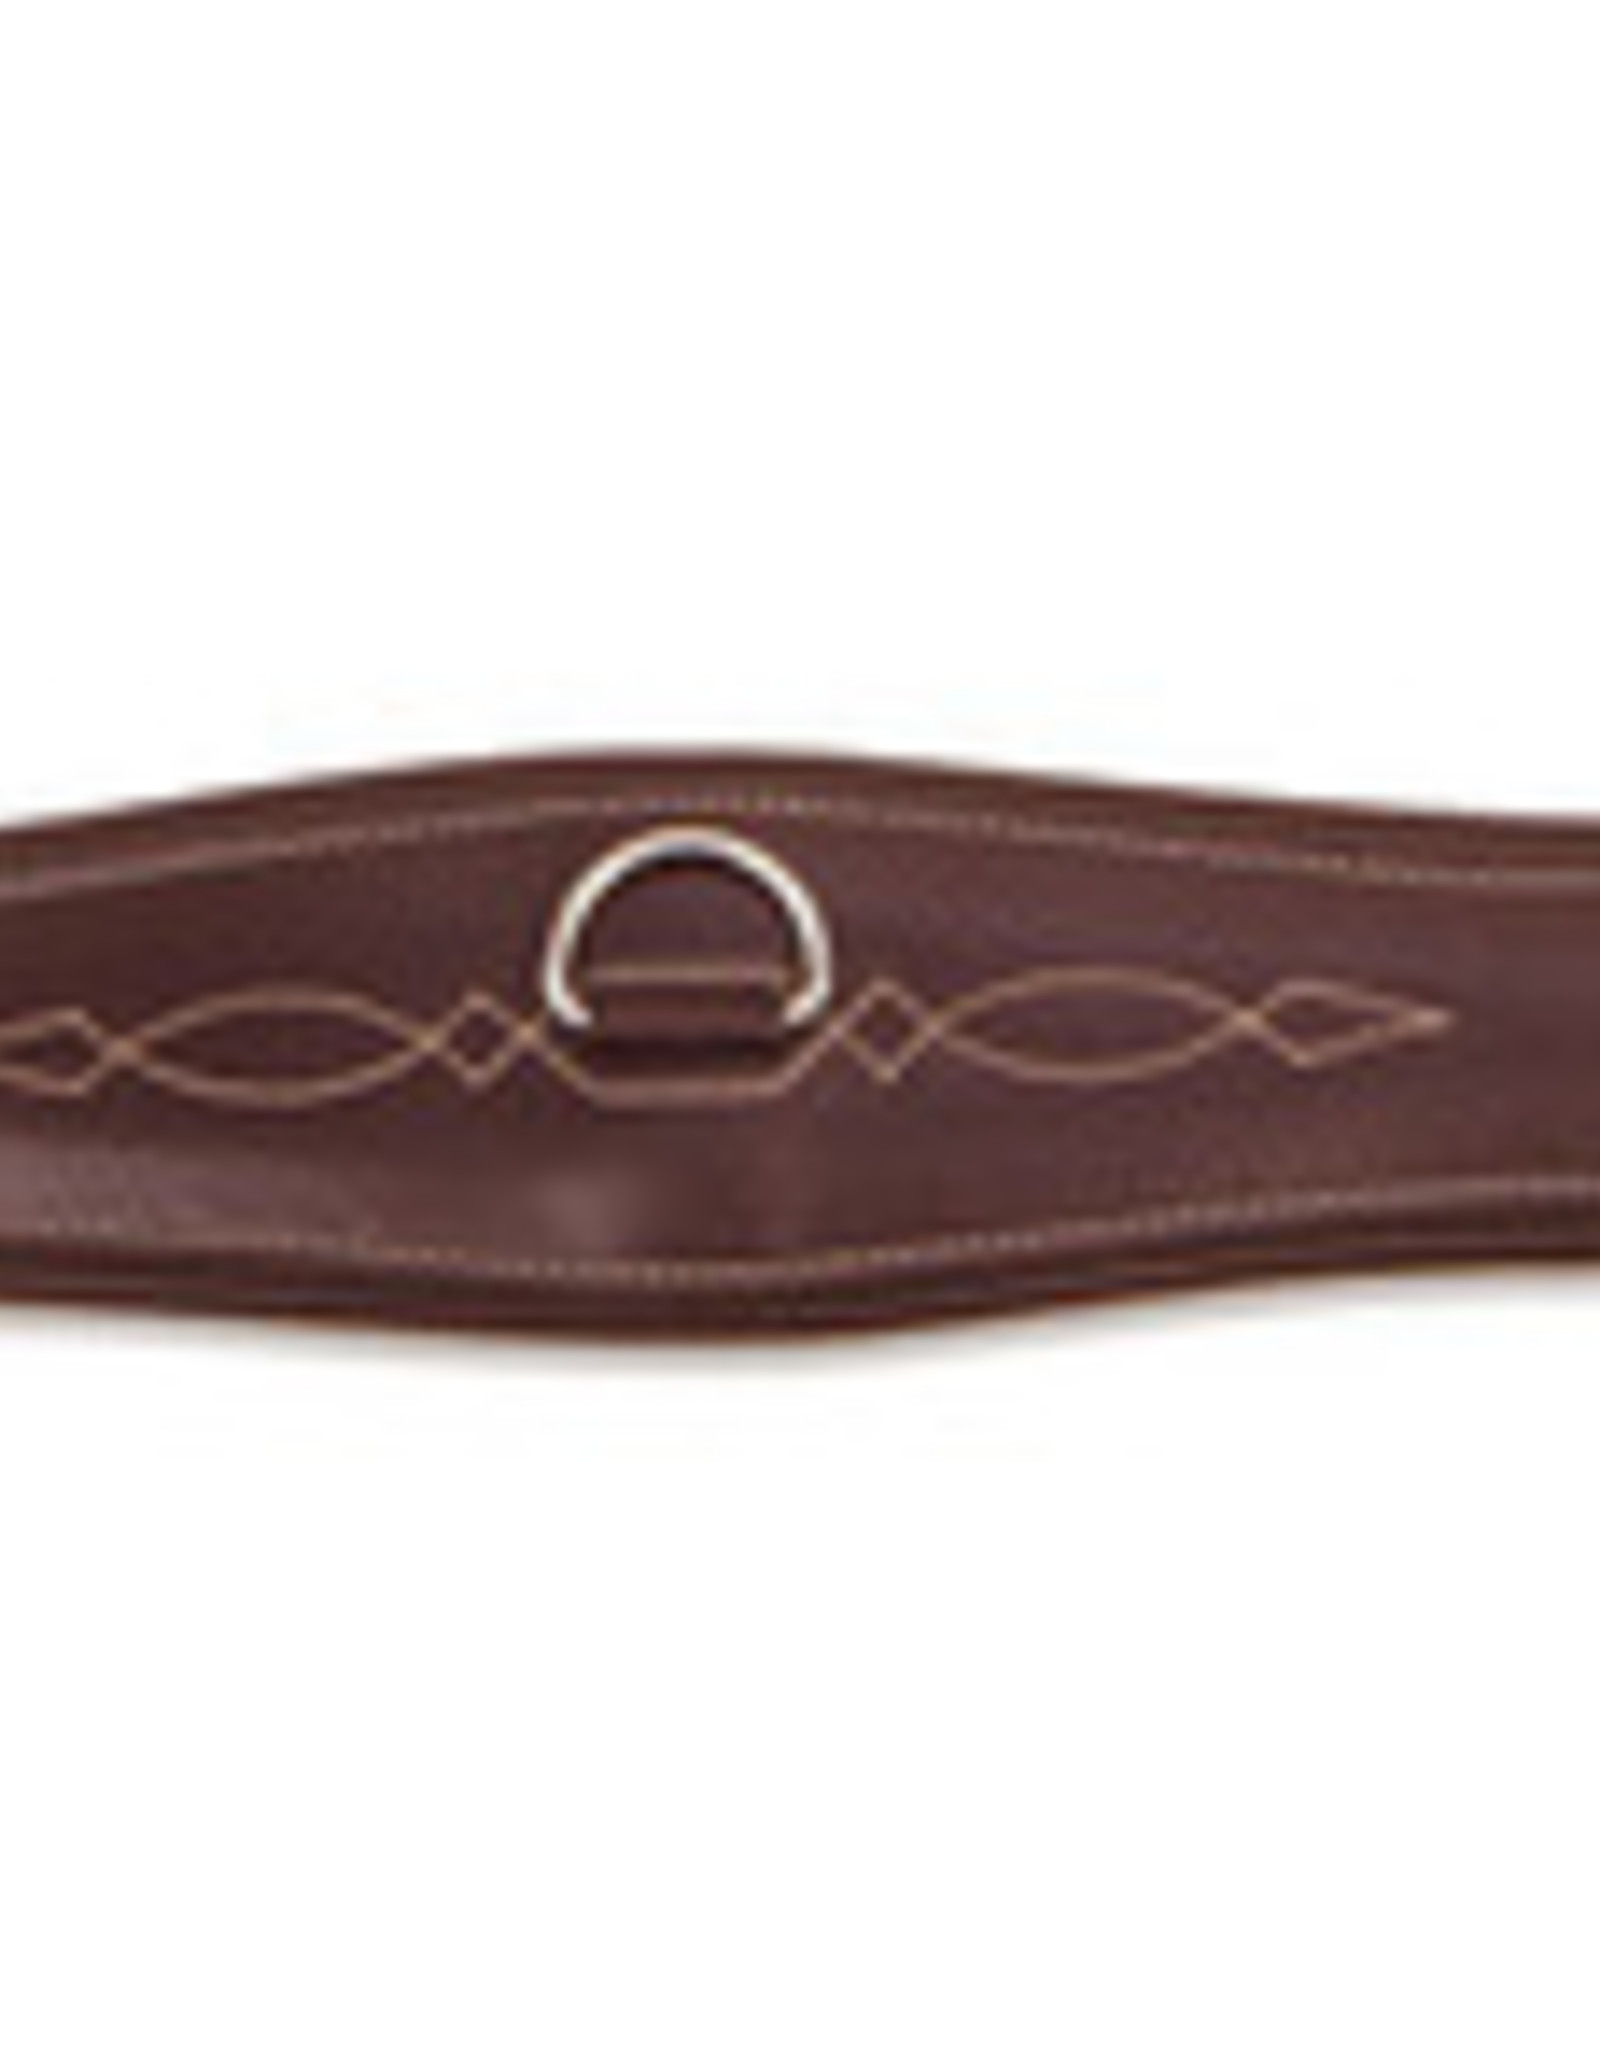 SHIRES LEATHER OVERLAY GIRTH